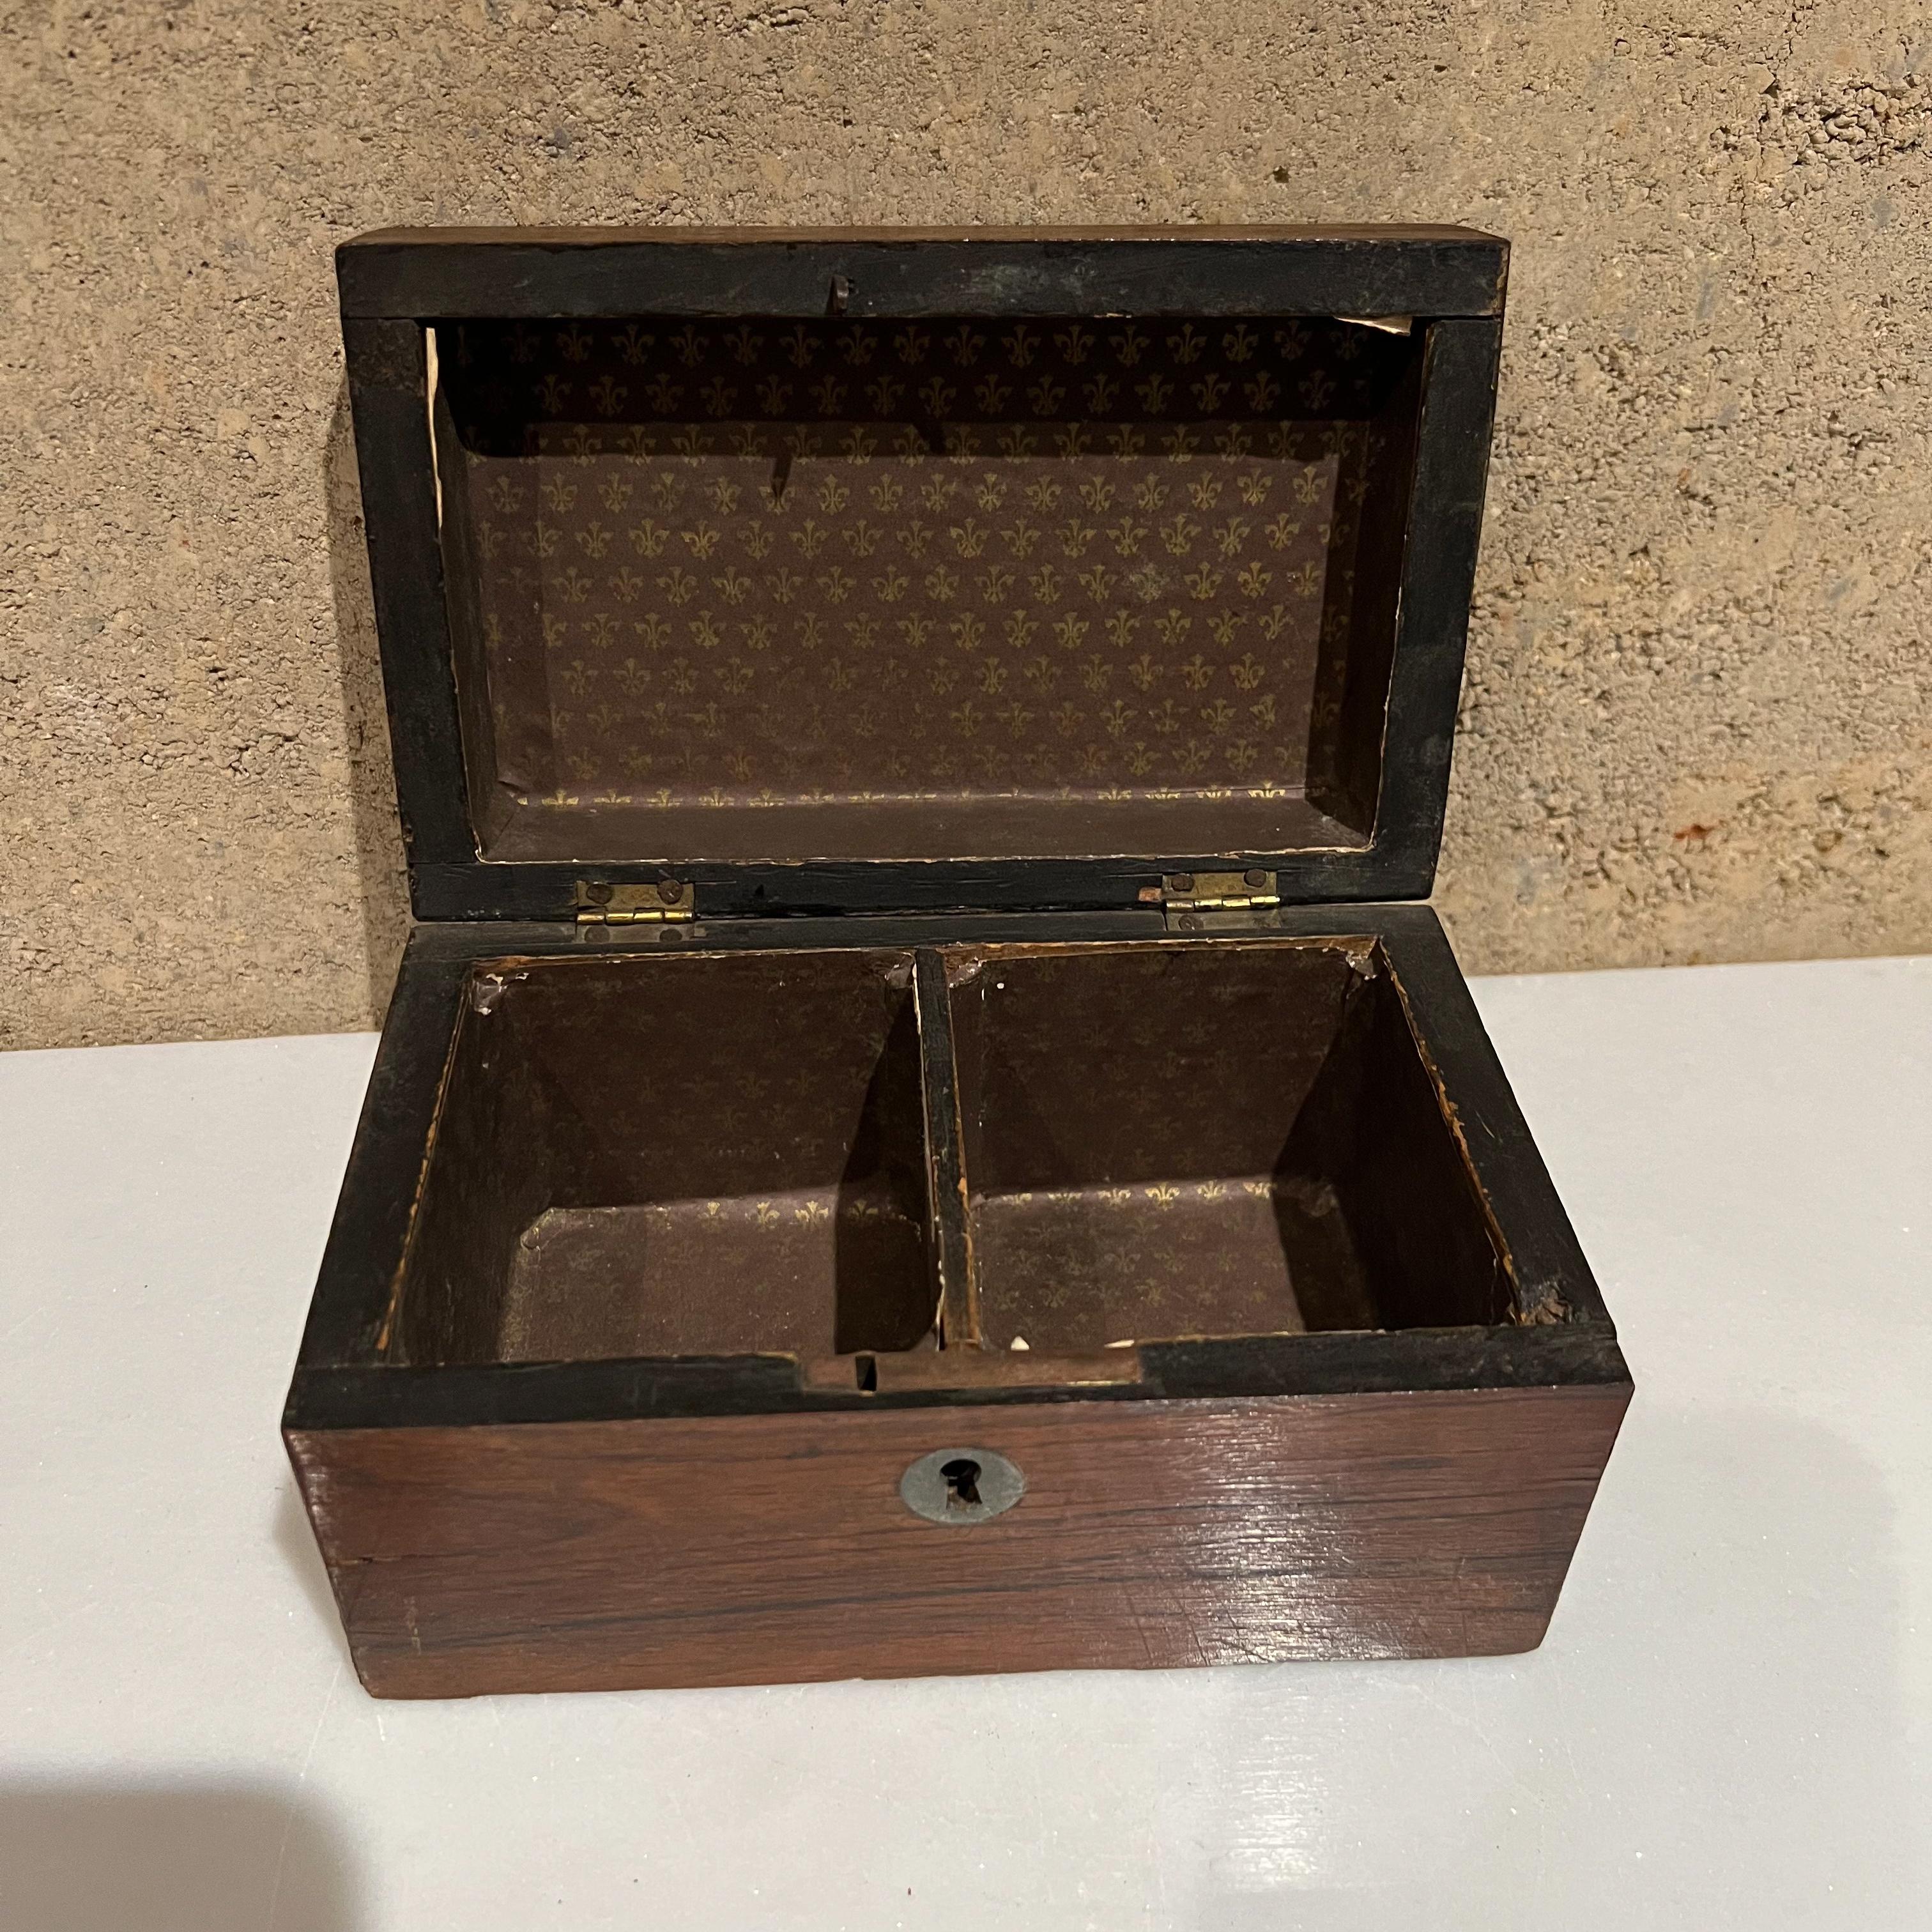 Lovely small rosewood Keepsake box vintage with clean modern lines.
Divided interior storage
Rosewood veneer lovely design.
Preowned vintage unrestored condition. Some prior repairs are visible. No key.
Measures: 3.75 tall x 7 width x 4.75